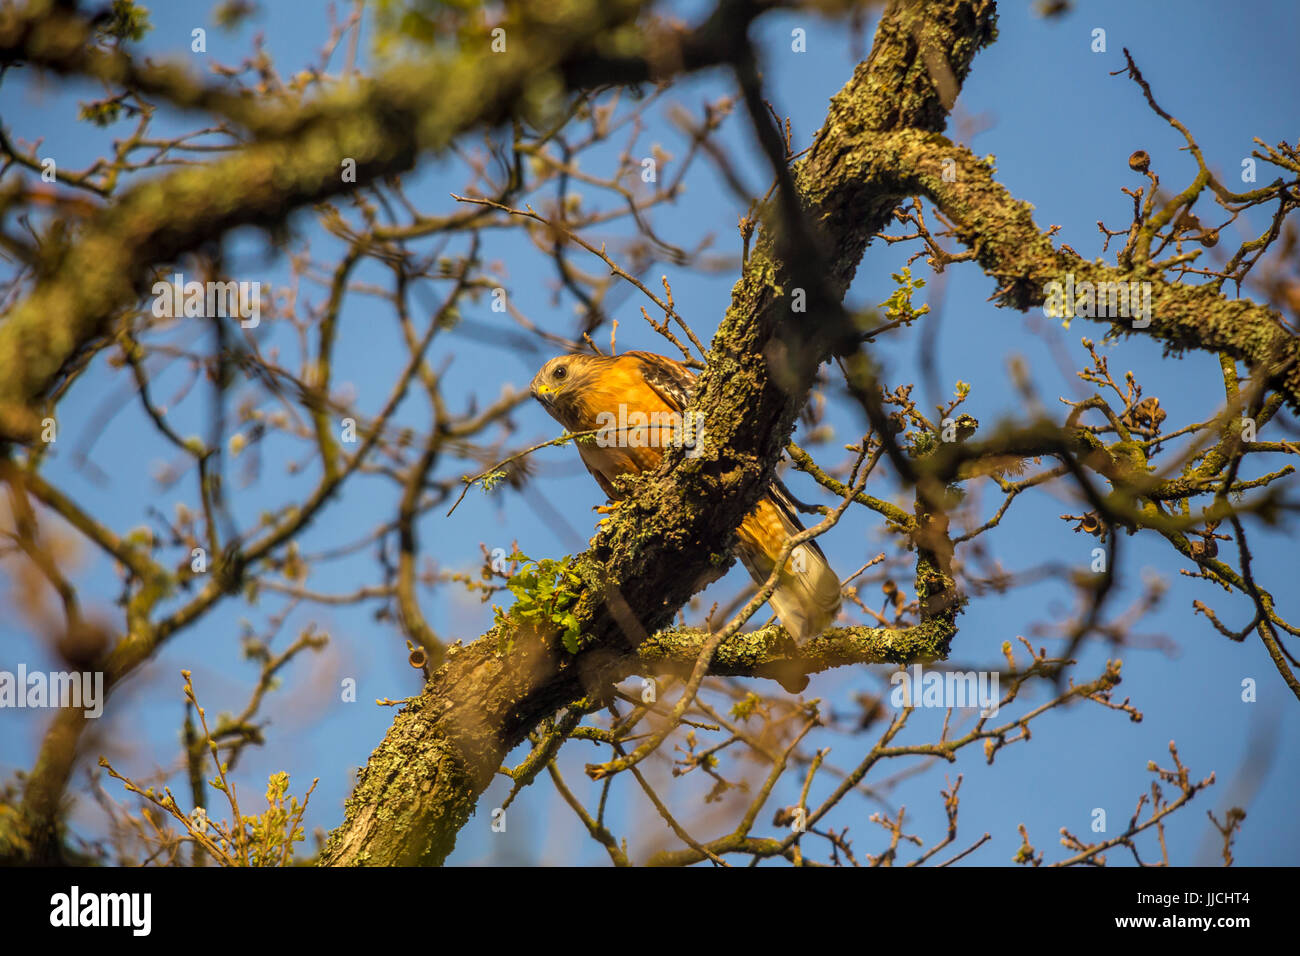 Red-shouldered hawk, Buteo lineatus, Red-shouldered hawk perched on tree branch, Novato, Marin County, California, United States, North America Stock Photo